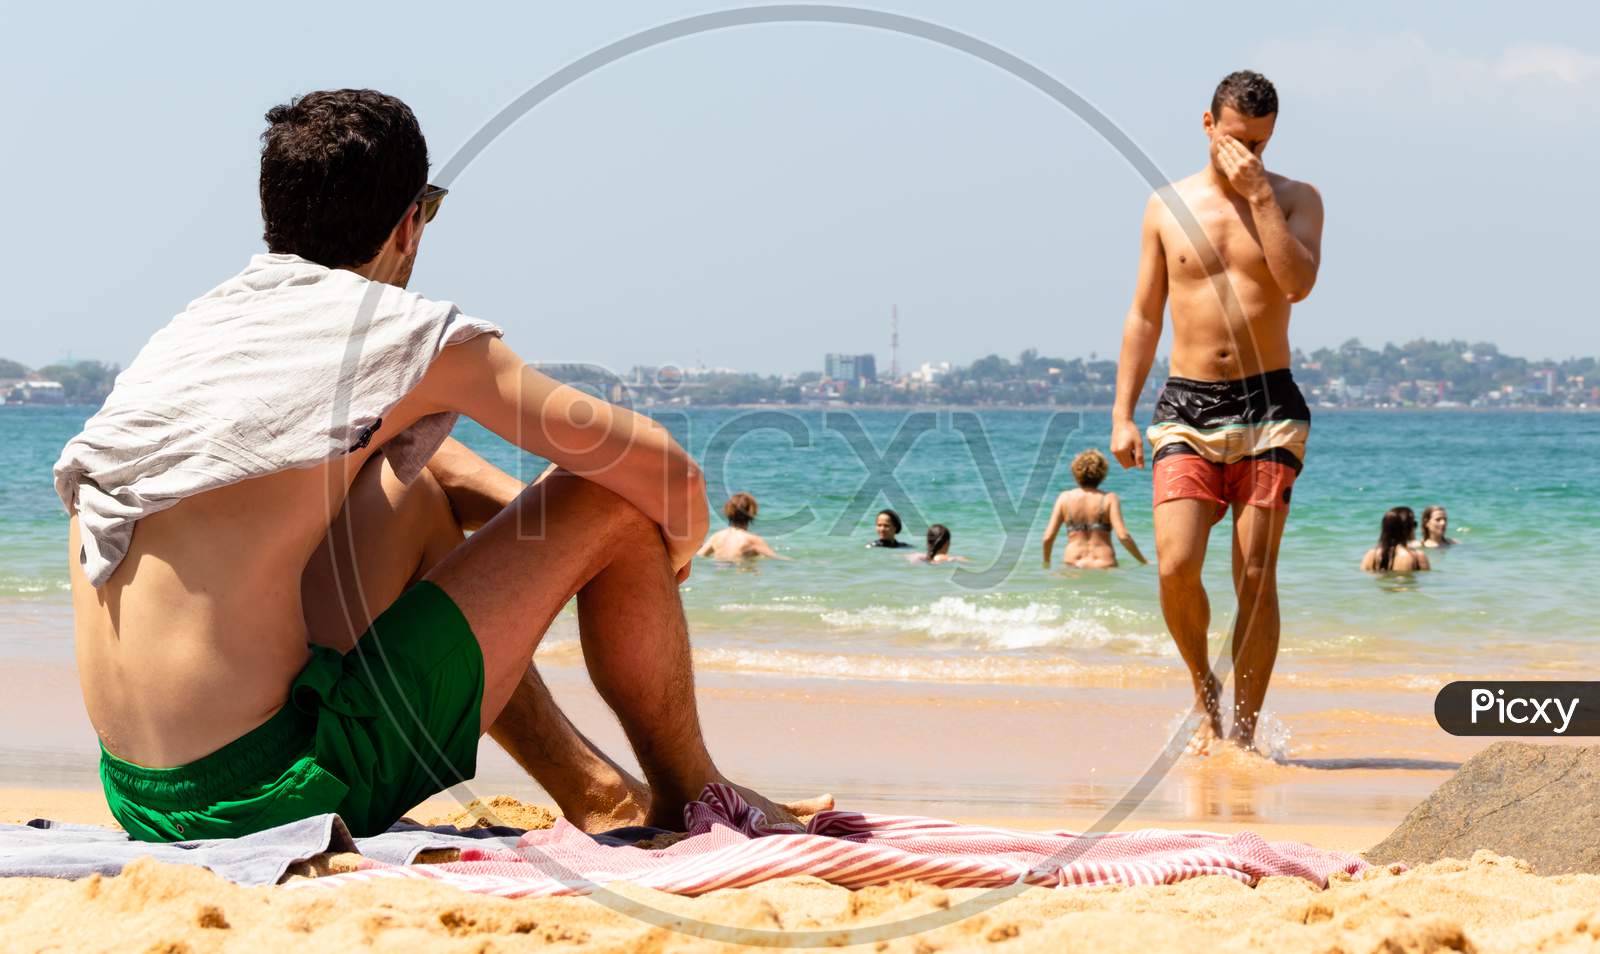 Young Male Sunbathing And Enjoying The View In The Picturesque Beach